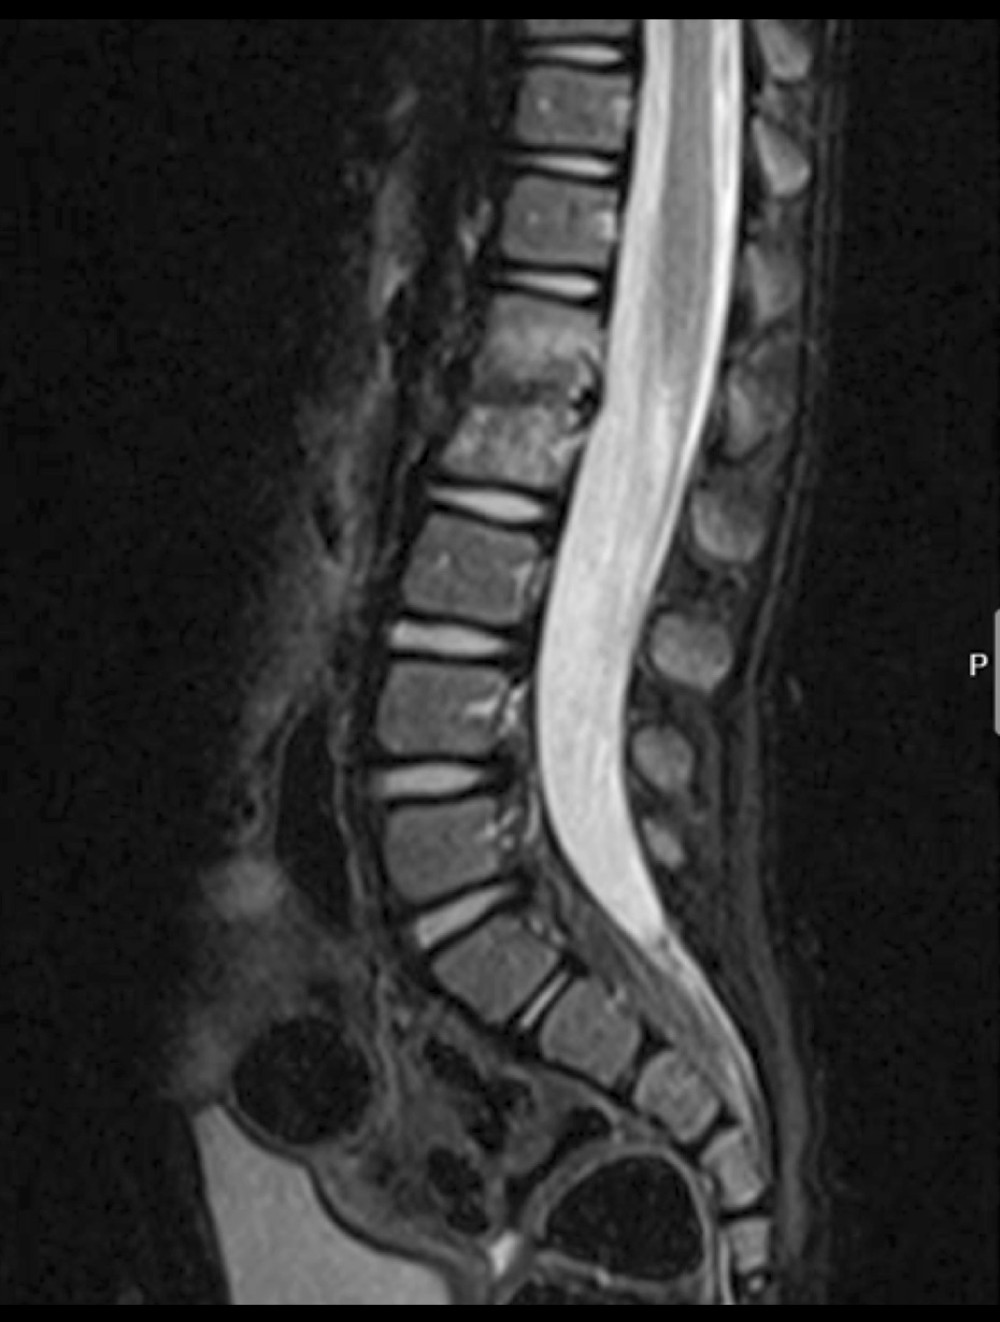 Lumbar spine MRI of a 21-month-old child with spondylodiscitis. Follow-up repeated MRI of the lumbar spine with contrast performed. T2 sequence sagittal view of the lumbar spine MRI showing significant reduction of the marrow edema and intervertebral disc collection at L1-L2 after 6 weeks of antibiotic therapy.